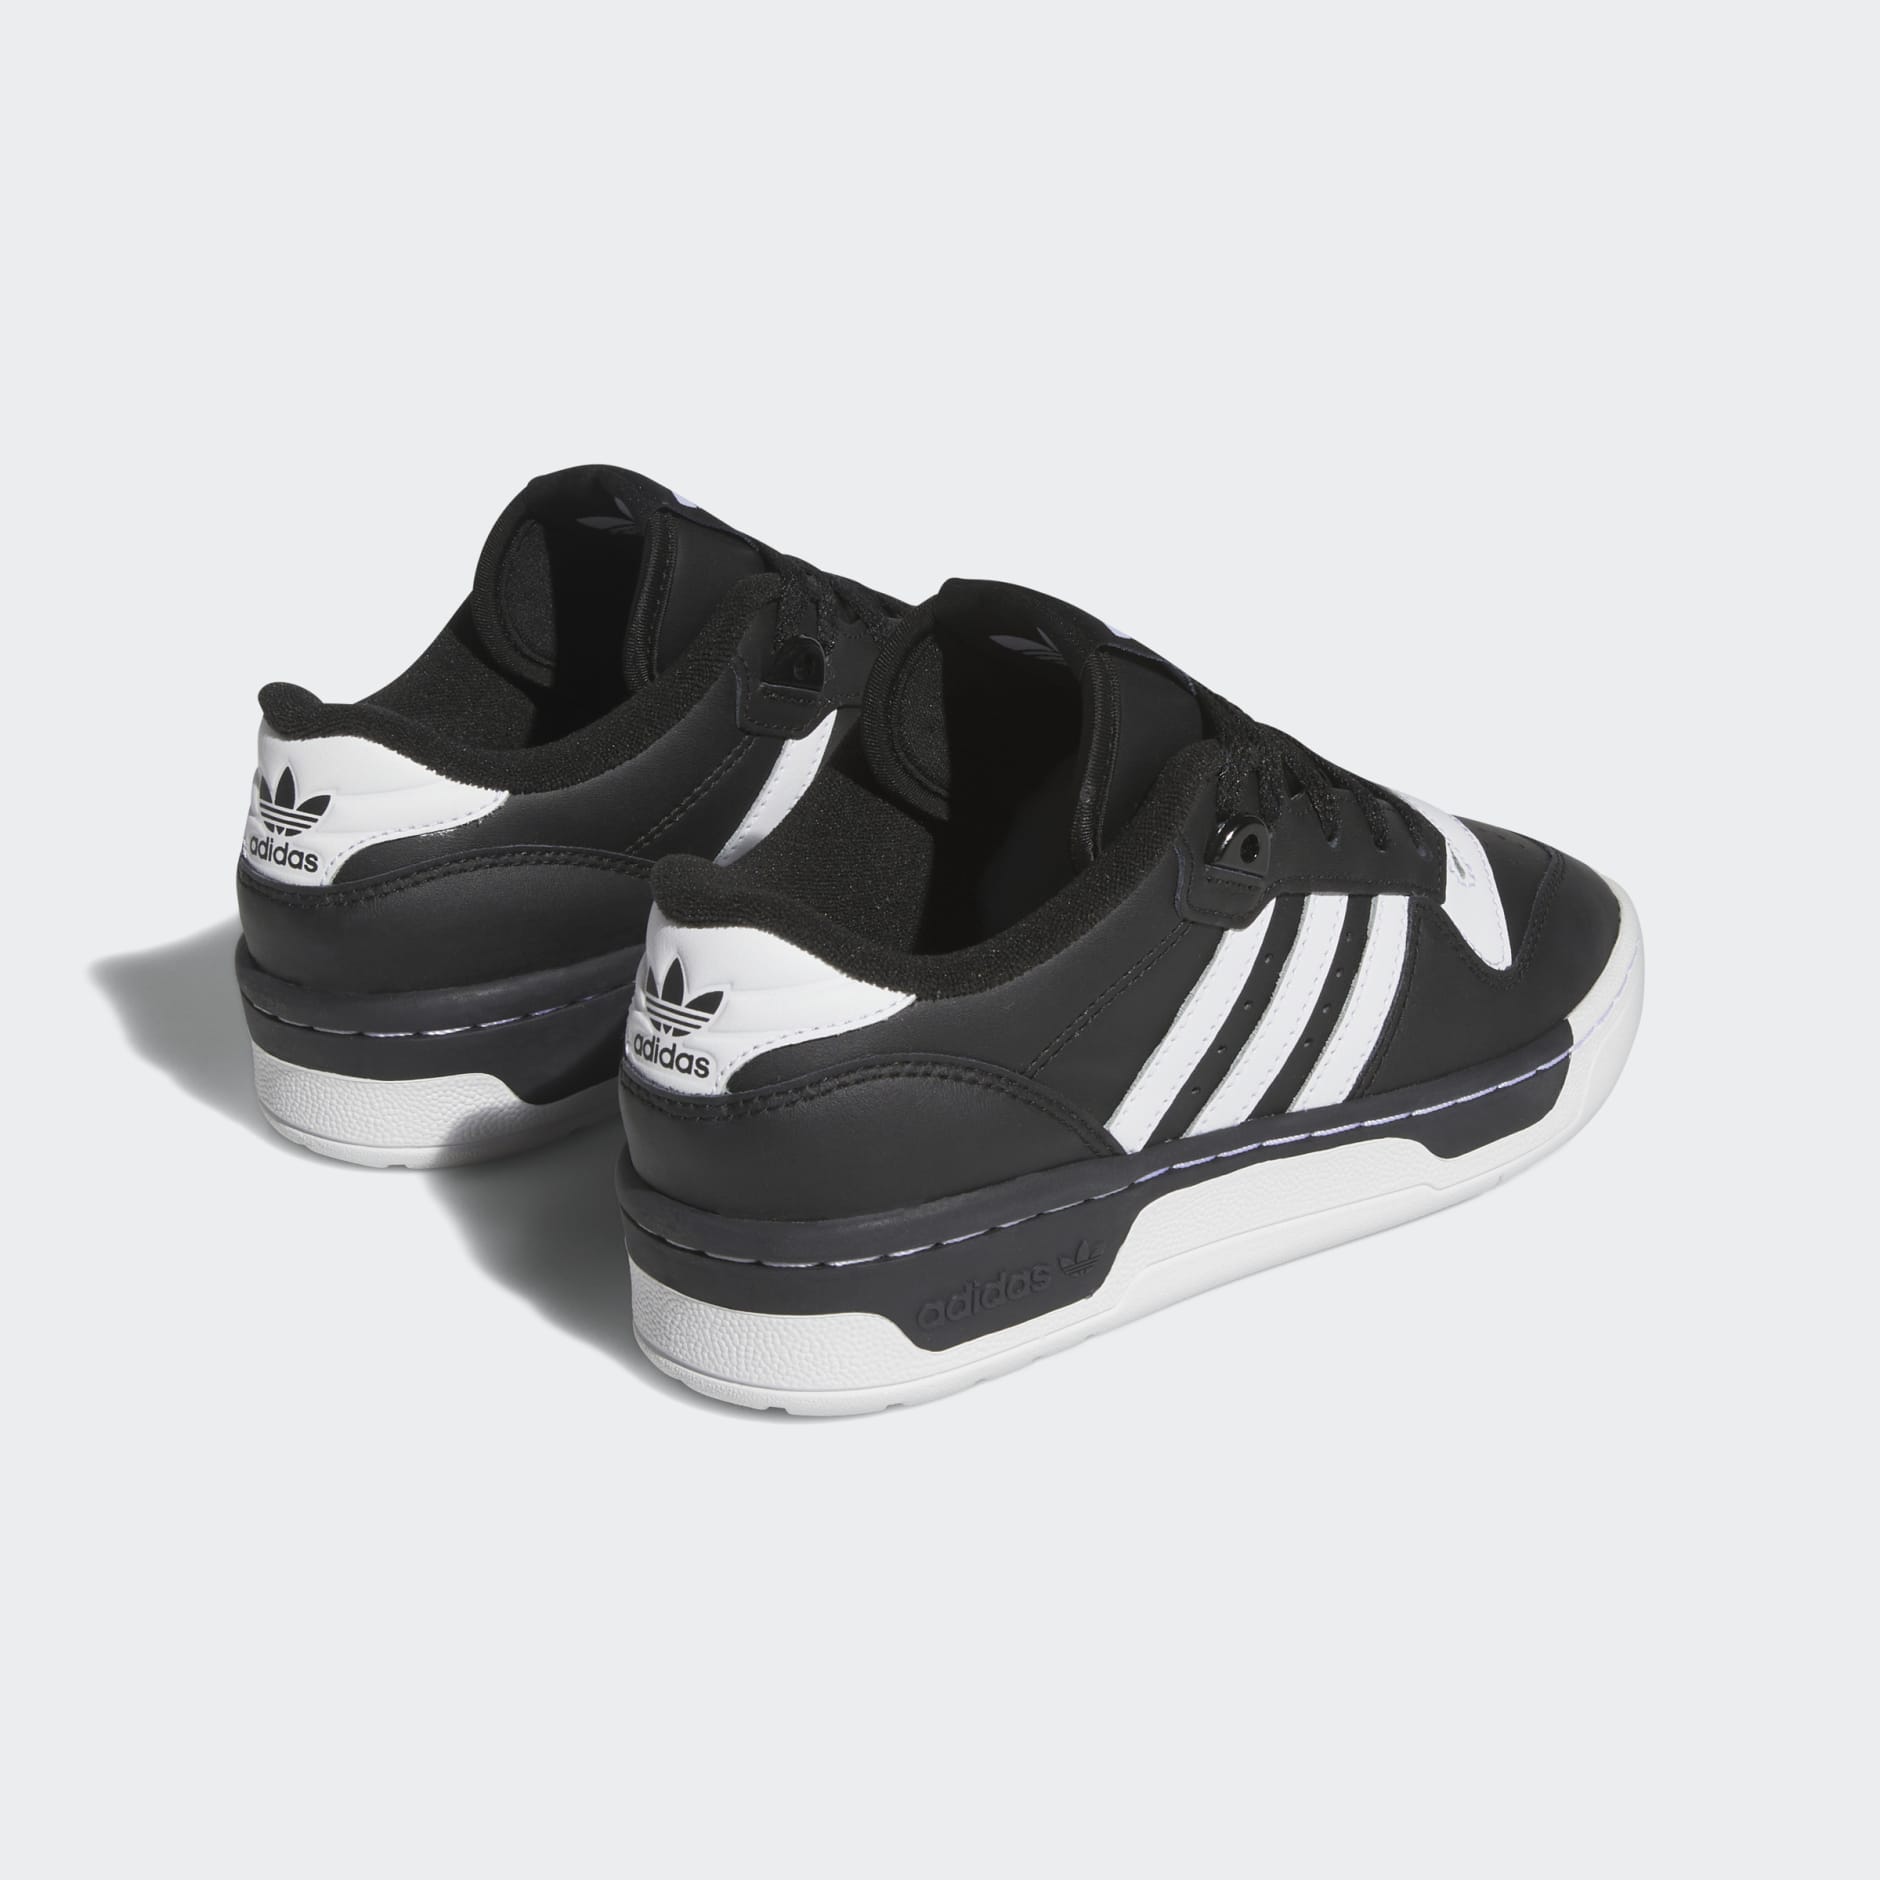 Shoes - Rivalry Low Shoes Kids - Black | adidas South Africa